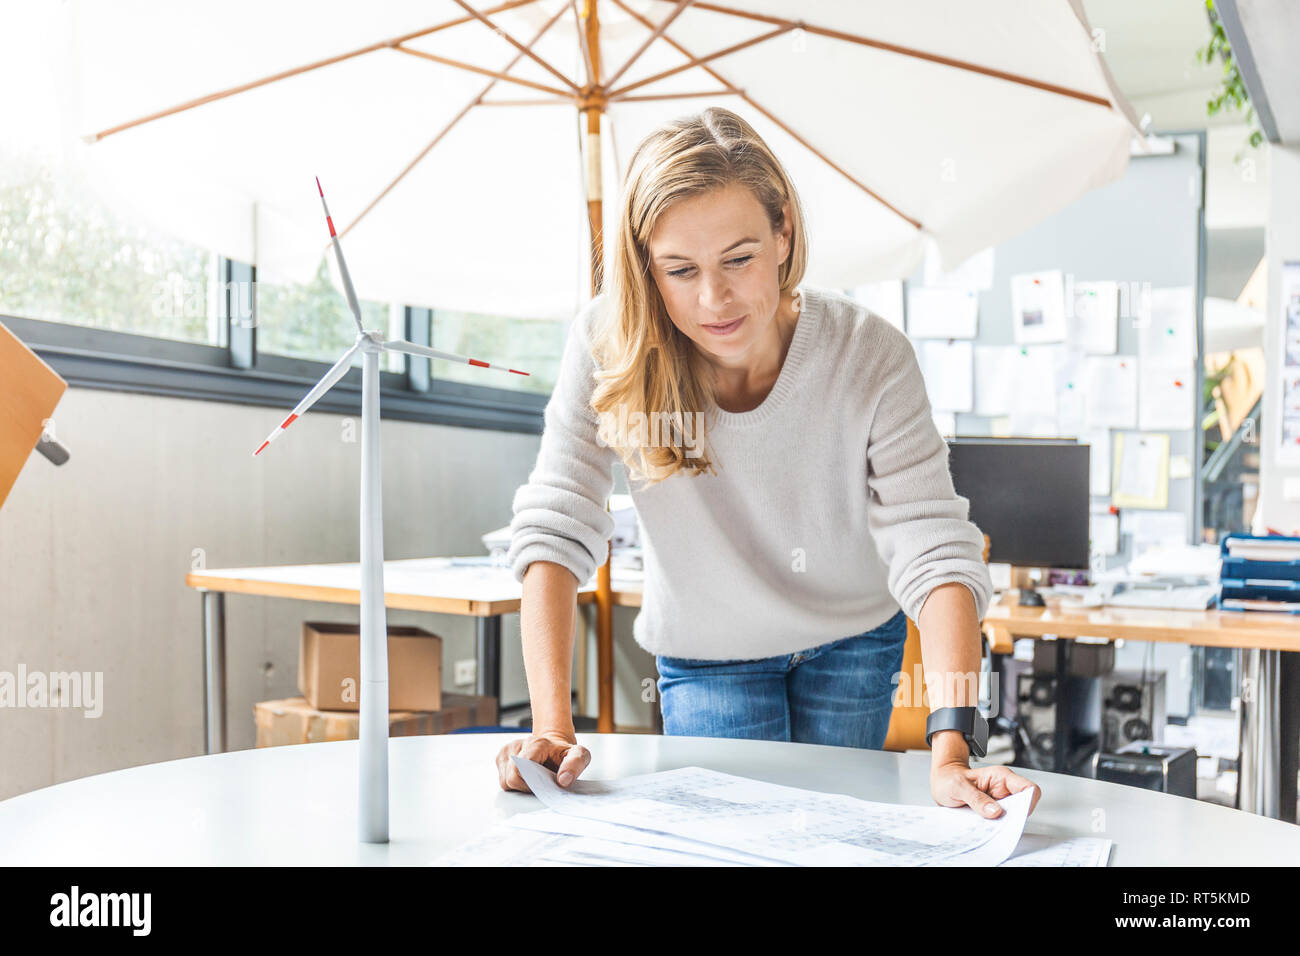 Woman in office working on plan with wind turbine model on table Stock Photo